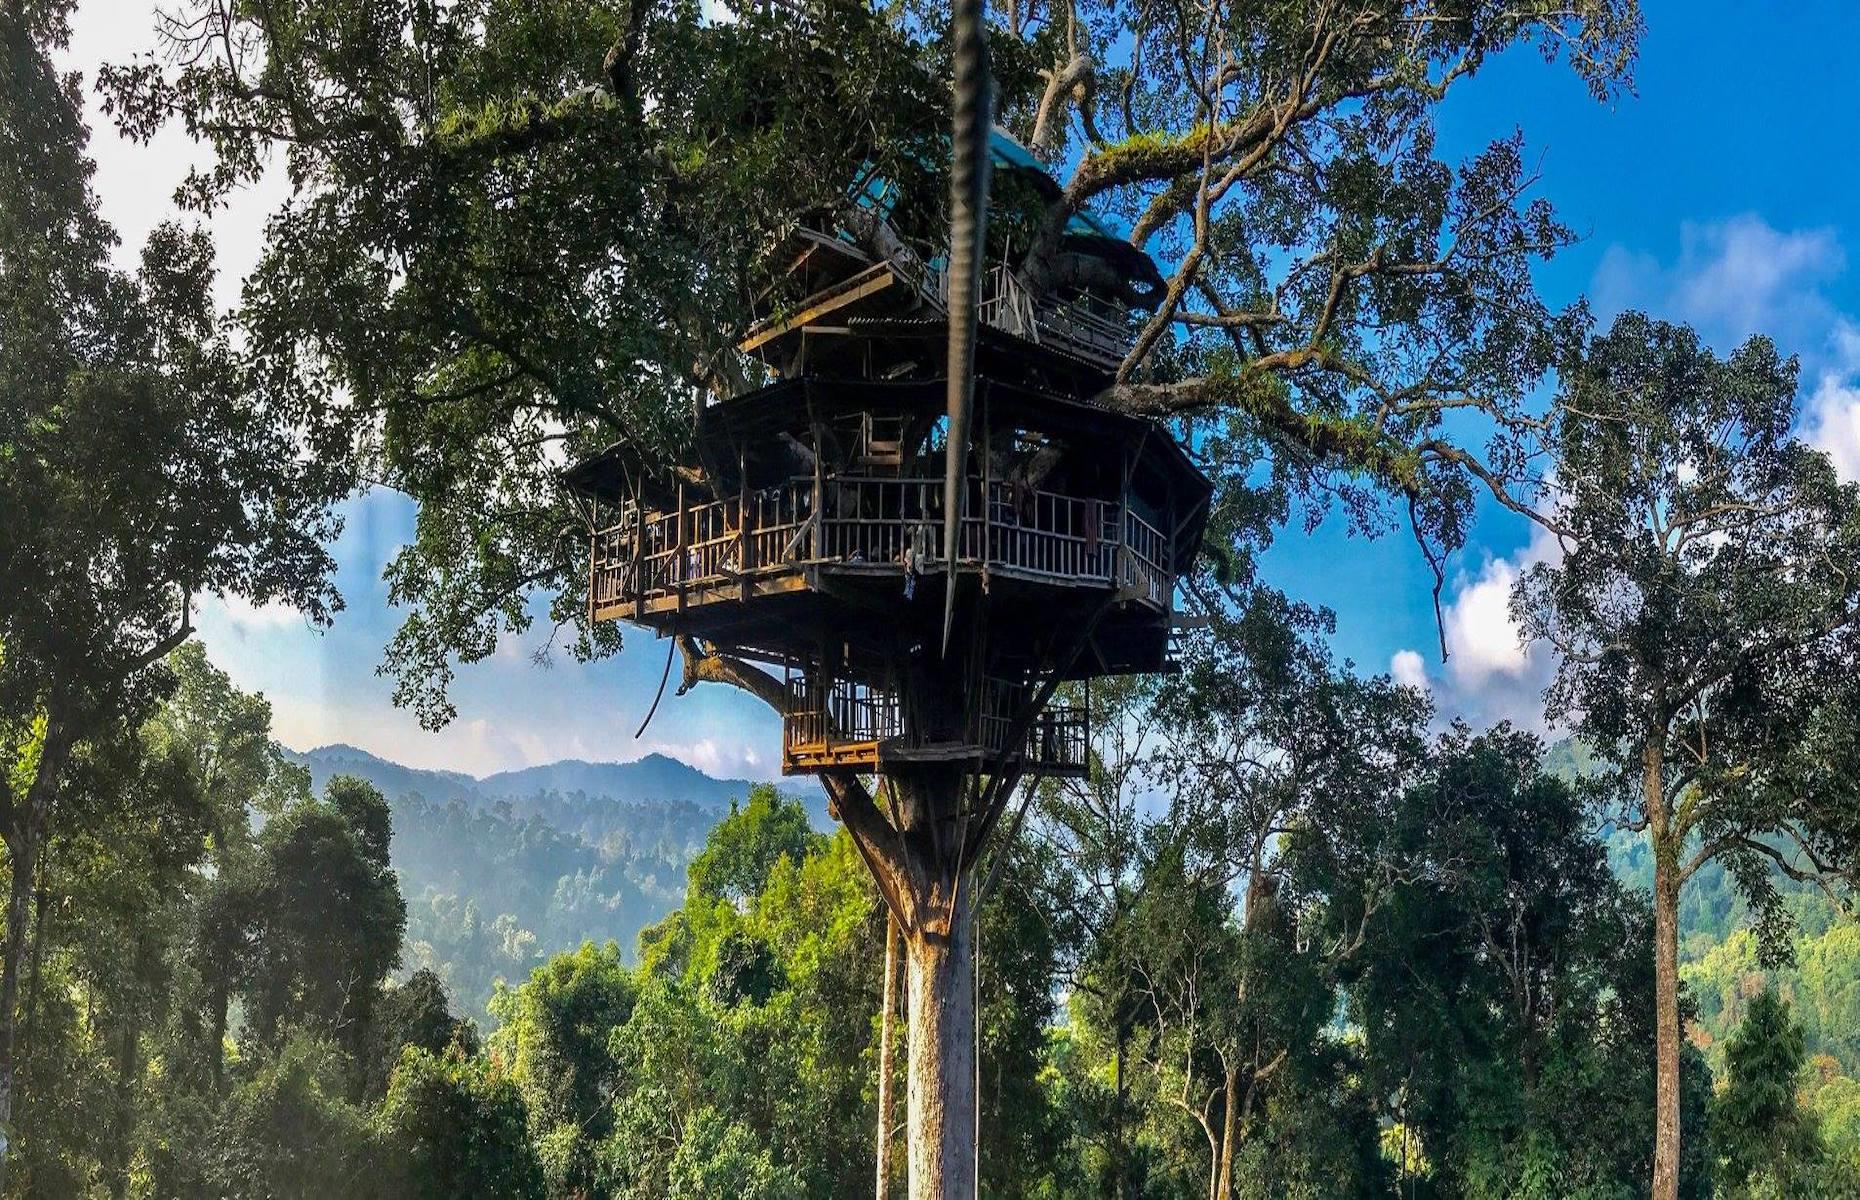 <p>Where better to get up close to the forest-dwelling creatures of Laos' Nam Kan National Park than a treehouse? With eight soaring structures reaching up to 130 feet (40m), <a href="https://www.facebook.com/gibbonexperience/">the Gibbon Experience</a>, a tourism-based conservation project, is said to have the tallest treehouses in the world. After you wake up among the trees, it’s highly likely the first face you’ll see is that of a black-crested gibbon – they live in the forests of northwestern Laos. And if that isn’t thrilling enough, the only way to reach them and bed down for the night is via a network of ziplines.</p>